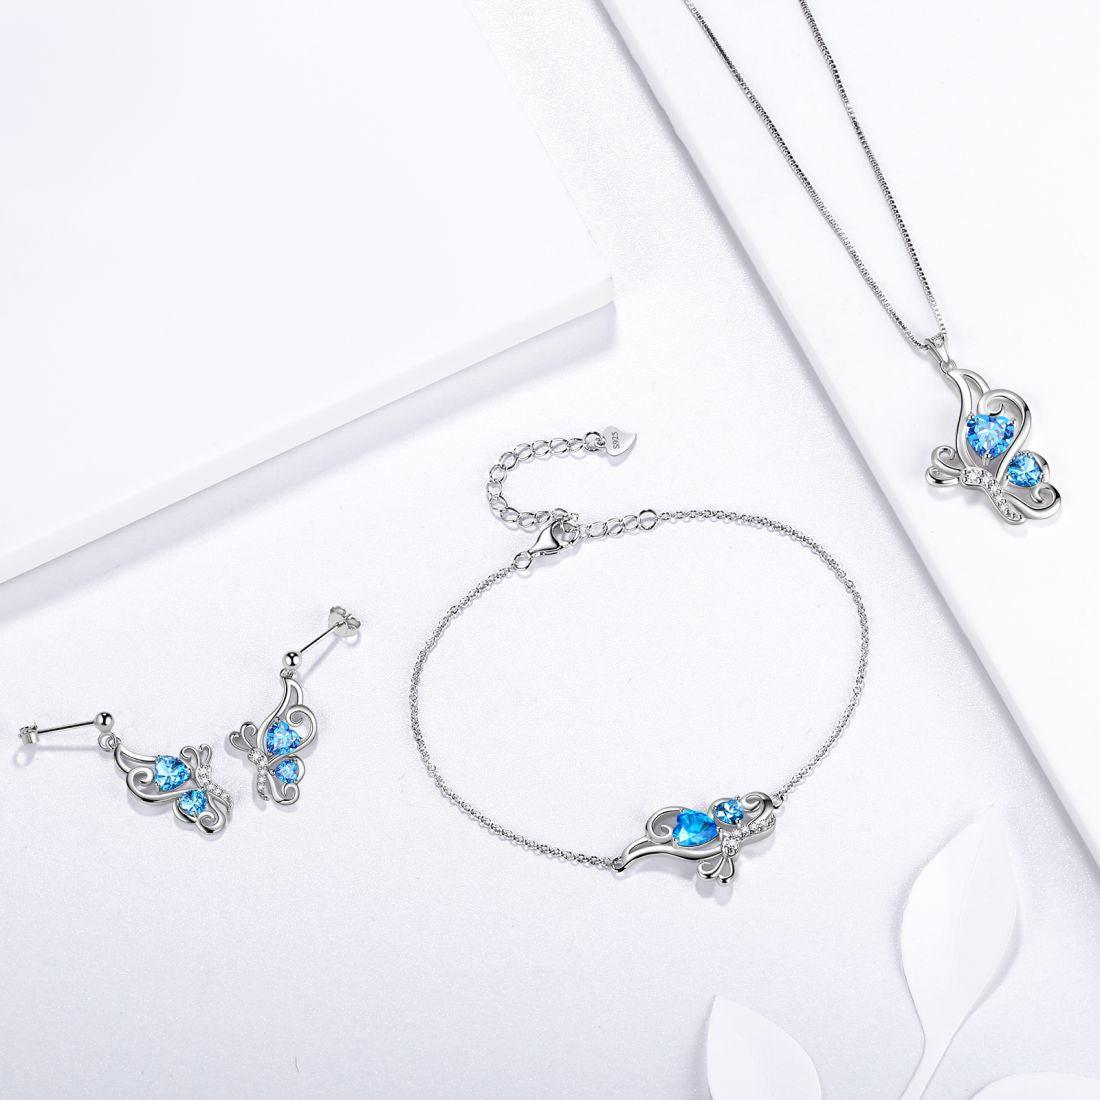 Butterfly Birthstone March Aquamarine Necklace Sterling Silver - Necklaces - Aurora Tears